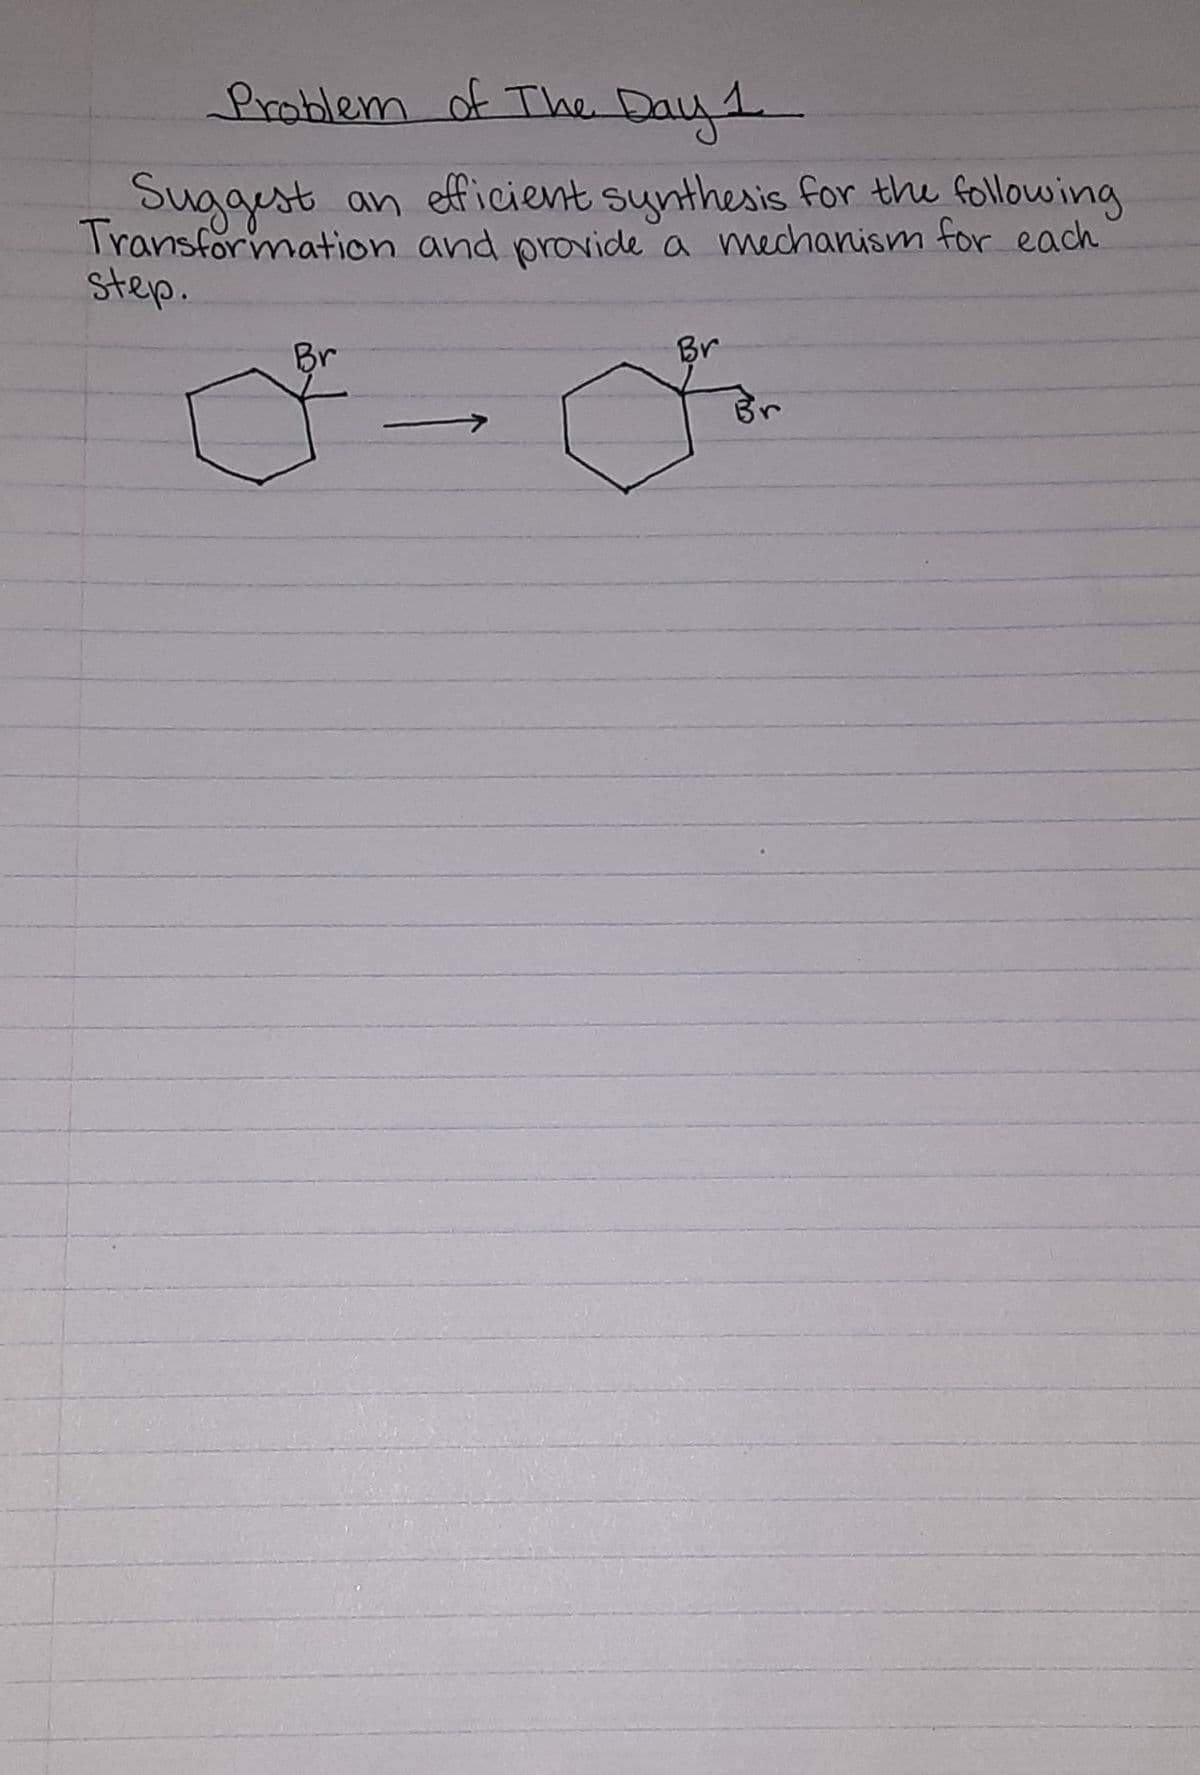 froblem of The Day1
Suggest an efficient synthesis for the following
Transformation and provide a mechanism for each
step.
Br
Br
